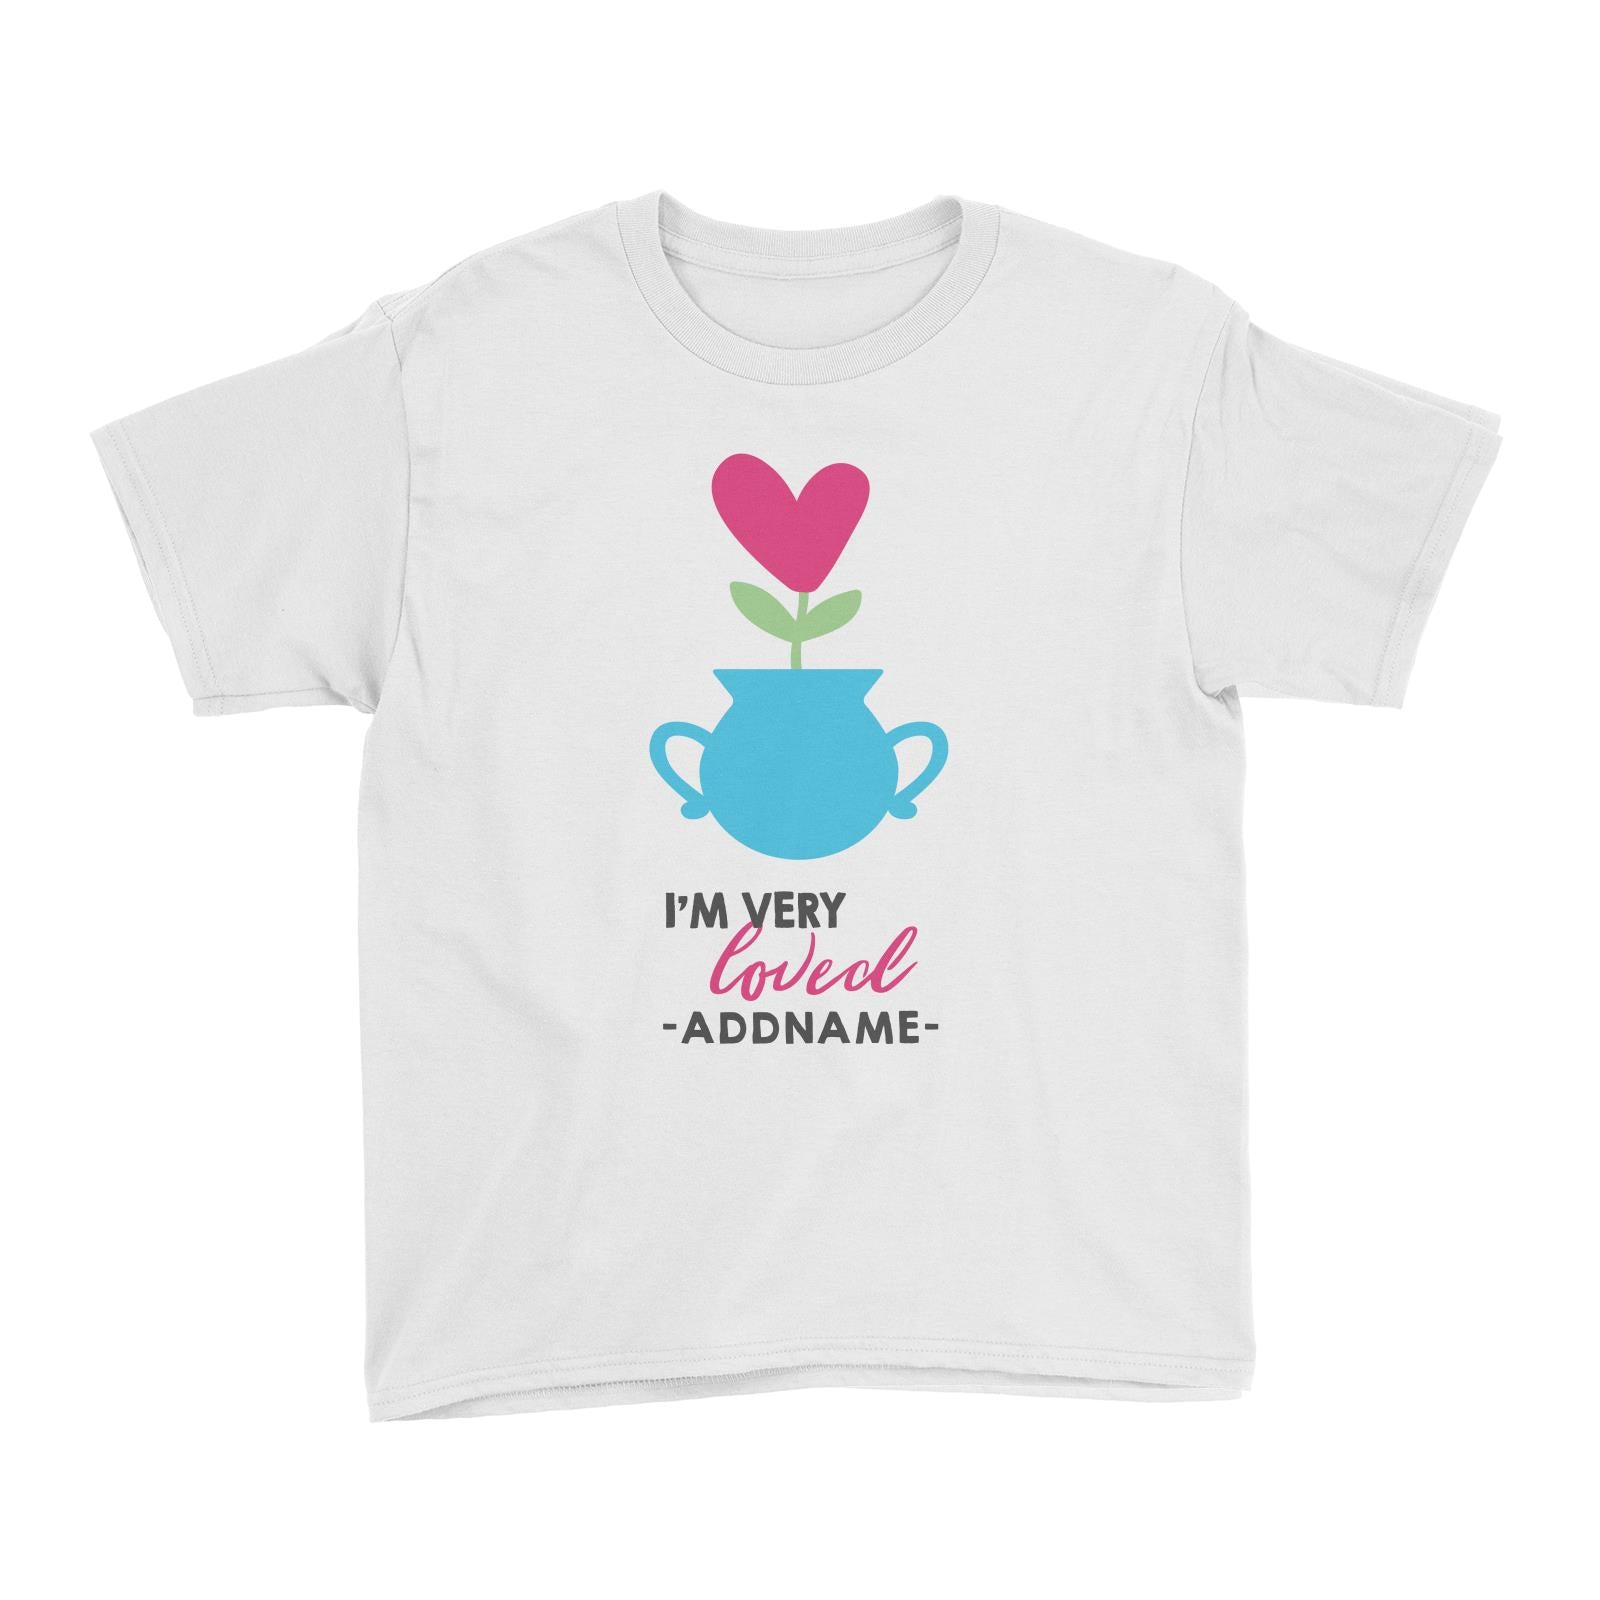 Nurturing I'm Very Loved Addname Kid's T-Shirt Love Matching Family Personalizable Designs